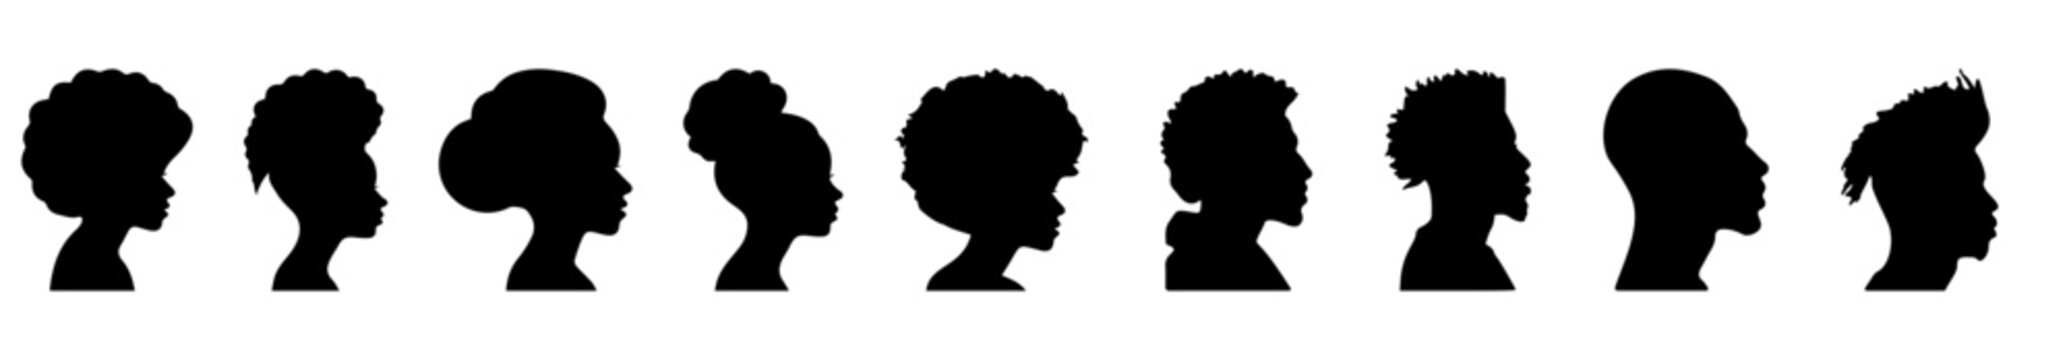 Silhouettes of African American men and women. Profile silhouettes. Vector illustration isolated on white background